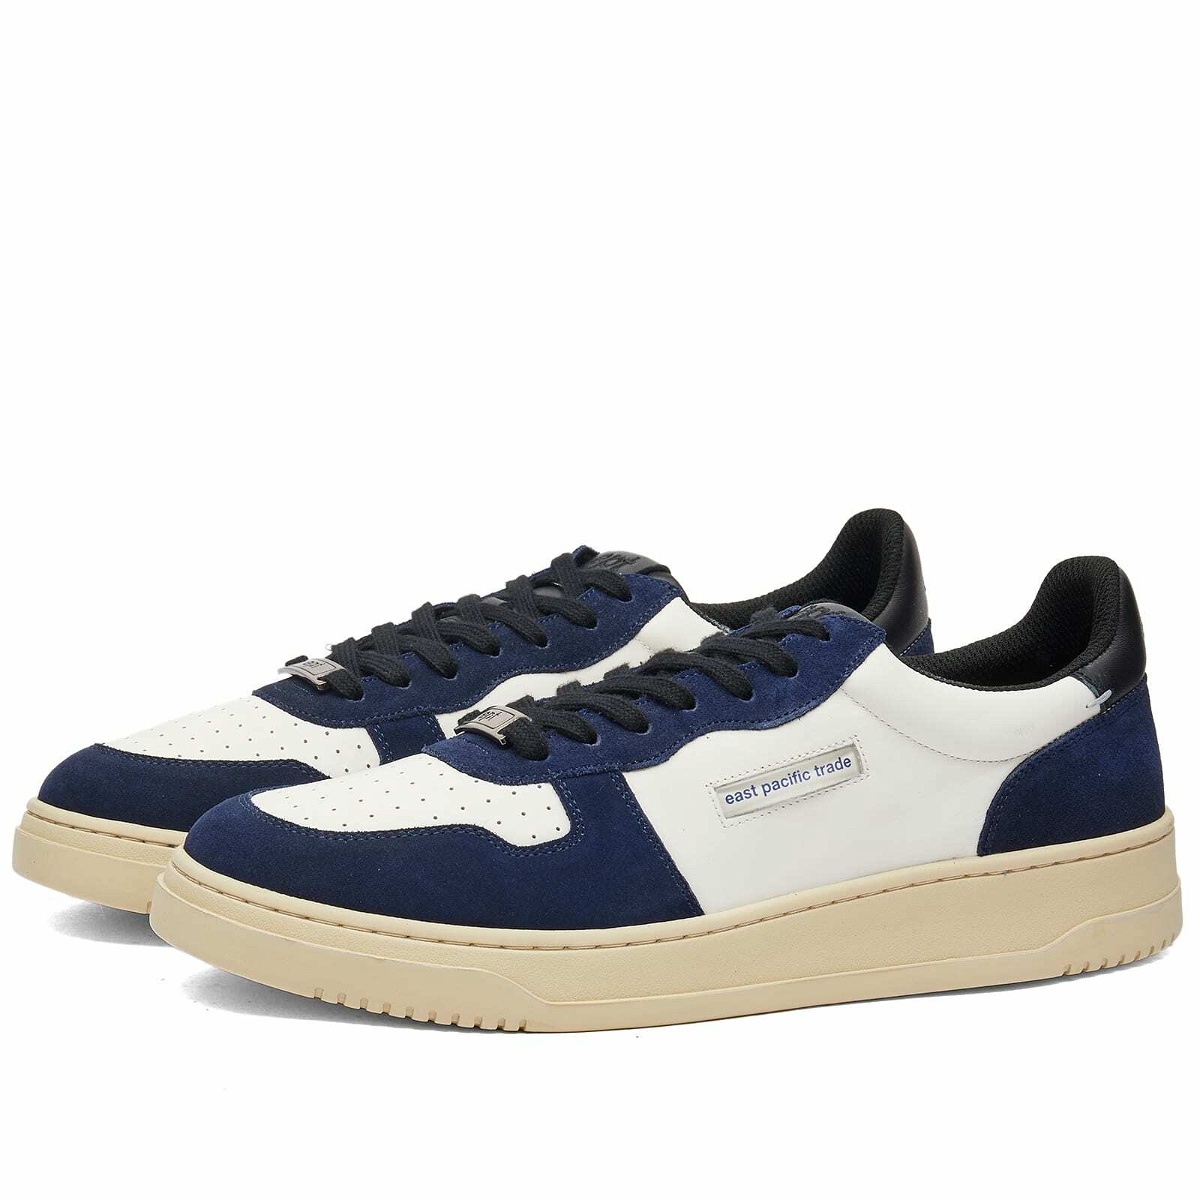 Photo: East Pacific Trade Men's Dive Court Sneakers in Navy/Off-White